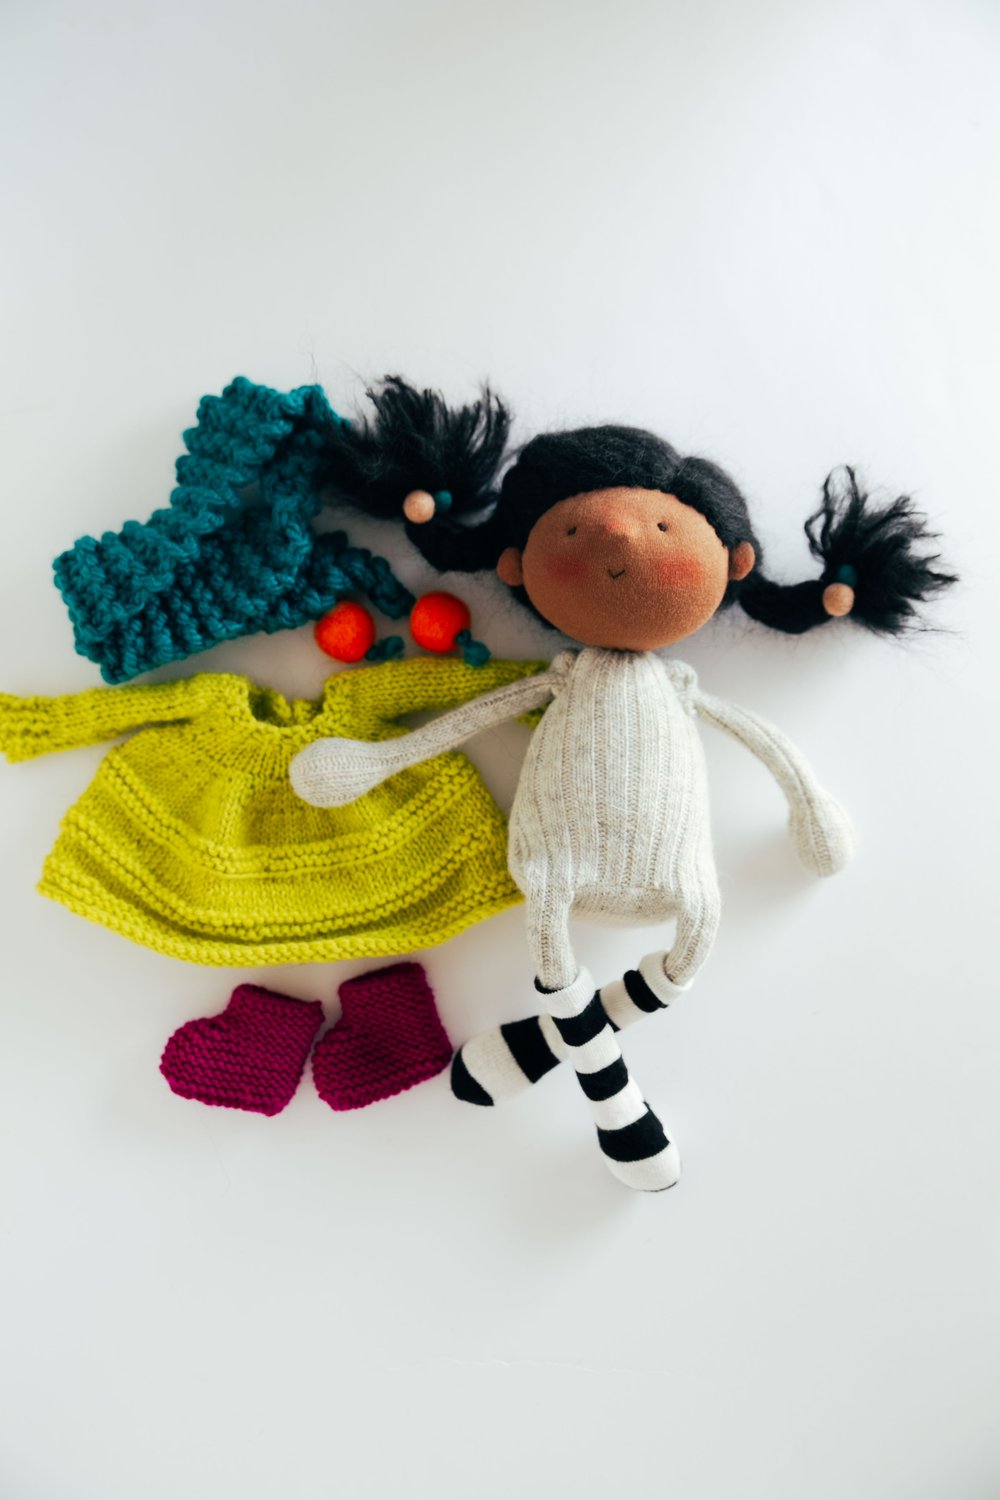 Image of Efa - Waldorf Inspired wonder filled doll with removable knit scarf, dress and boots